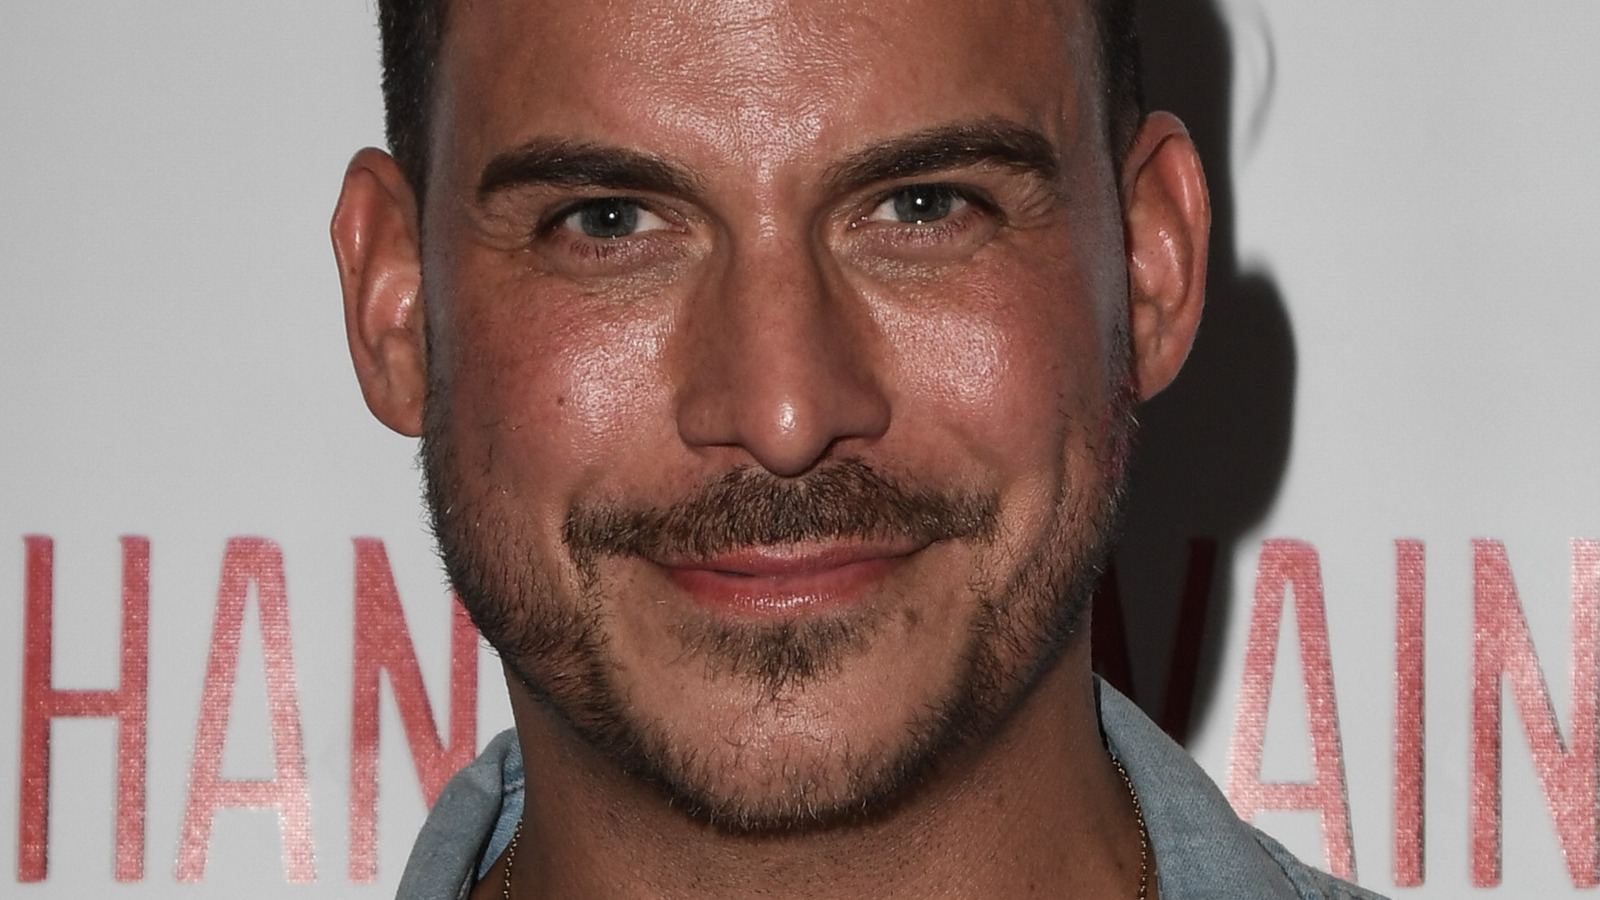 What Is Jax Taylor’s Real Name?